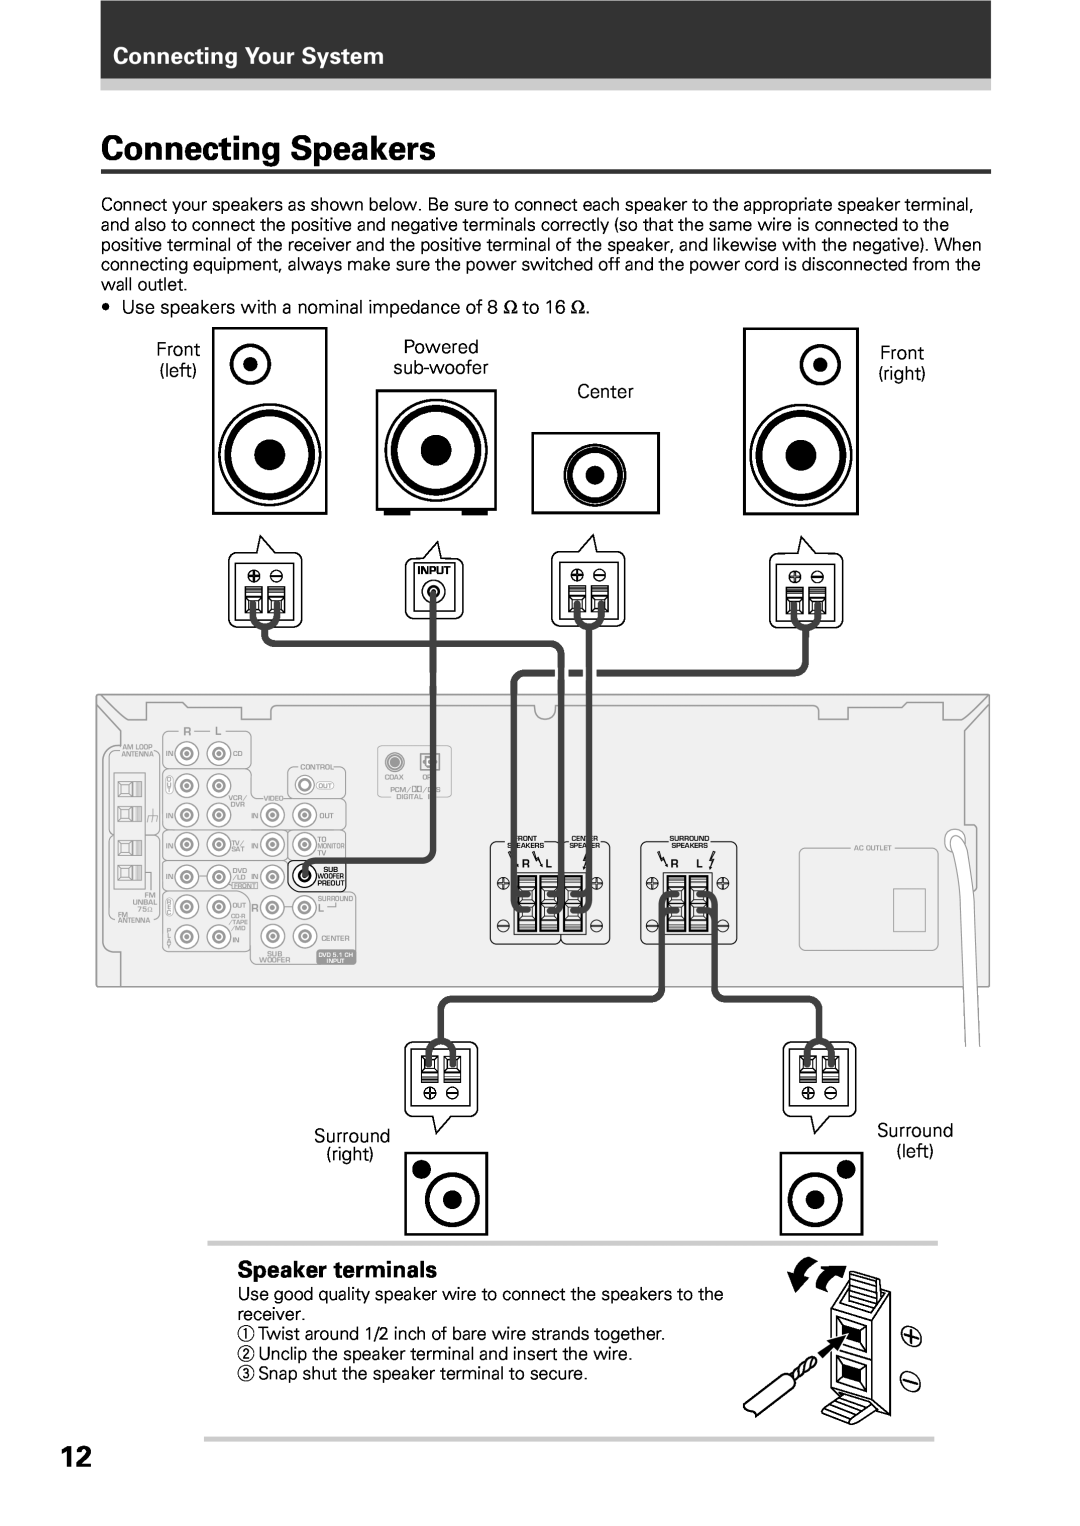 Pioneer VSX-D309 manual Connecting Speakers, Connecting Your System, Speaker terminals 